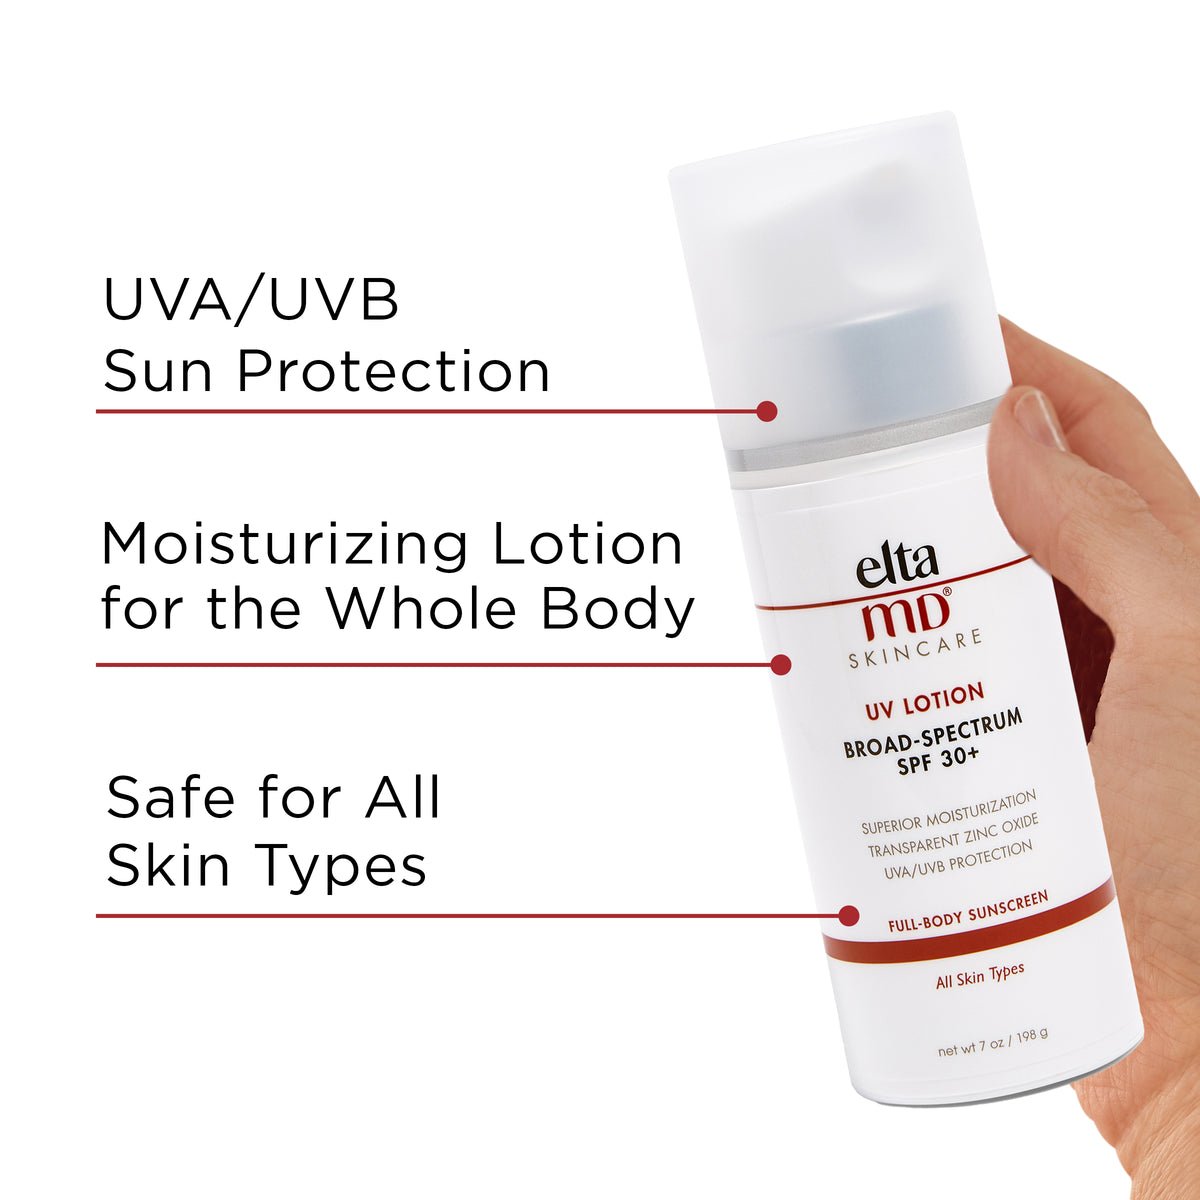 EltaMD UV Lotion Broad-Spectrum SPF 30+ - The Look and Co